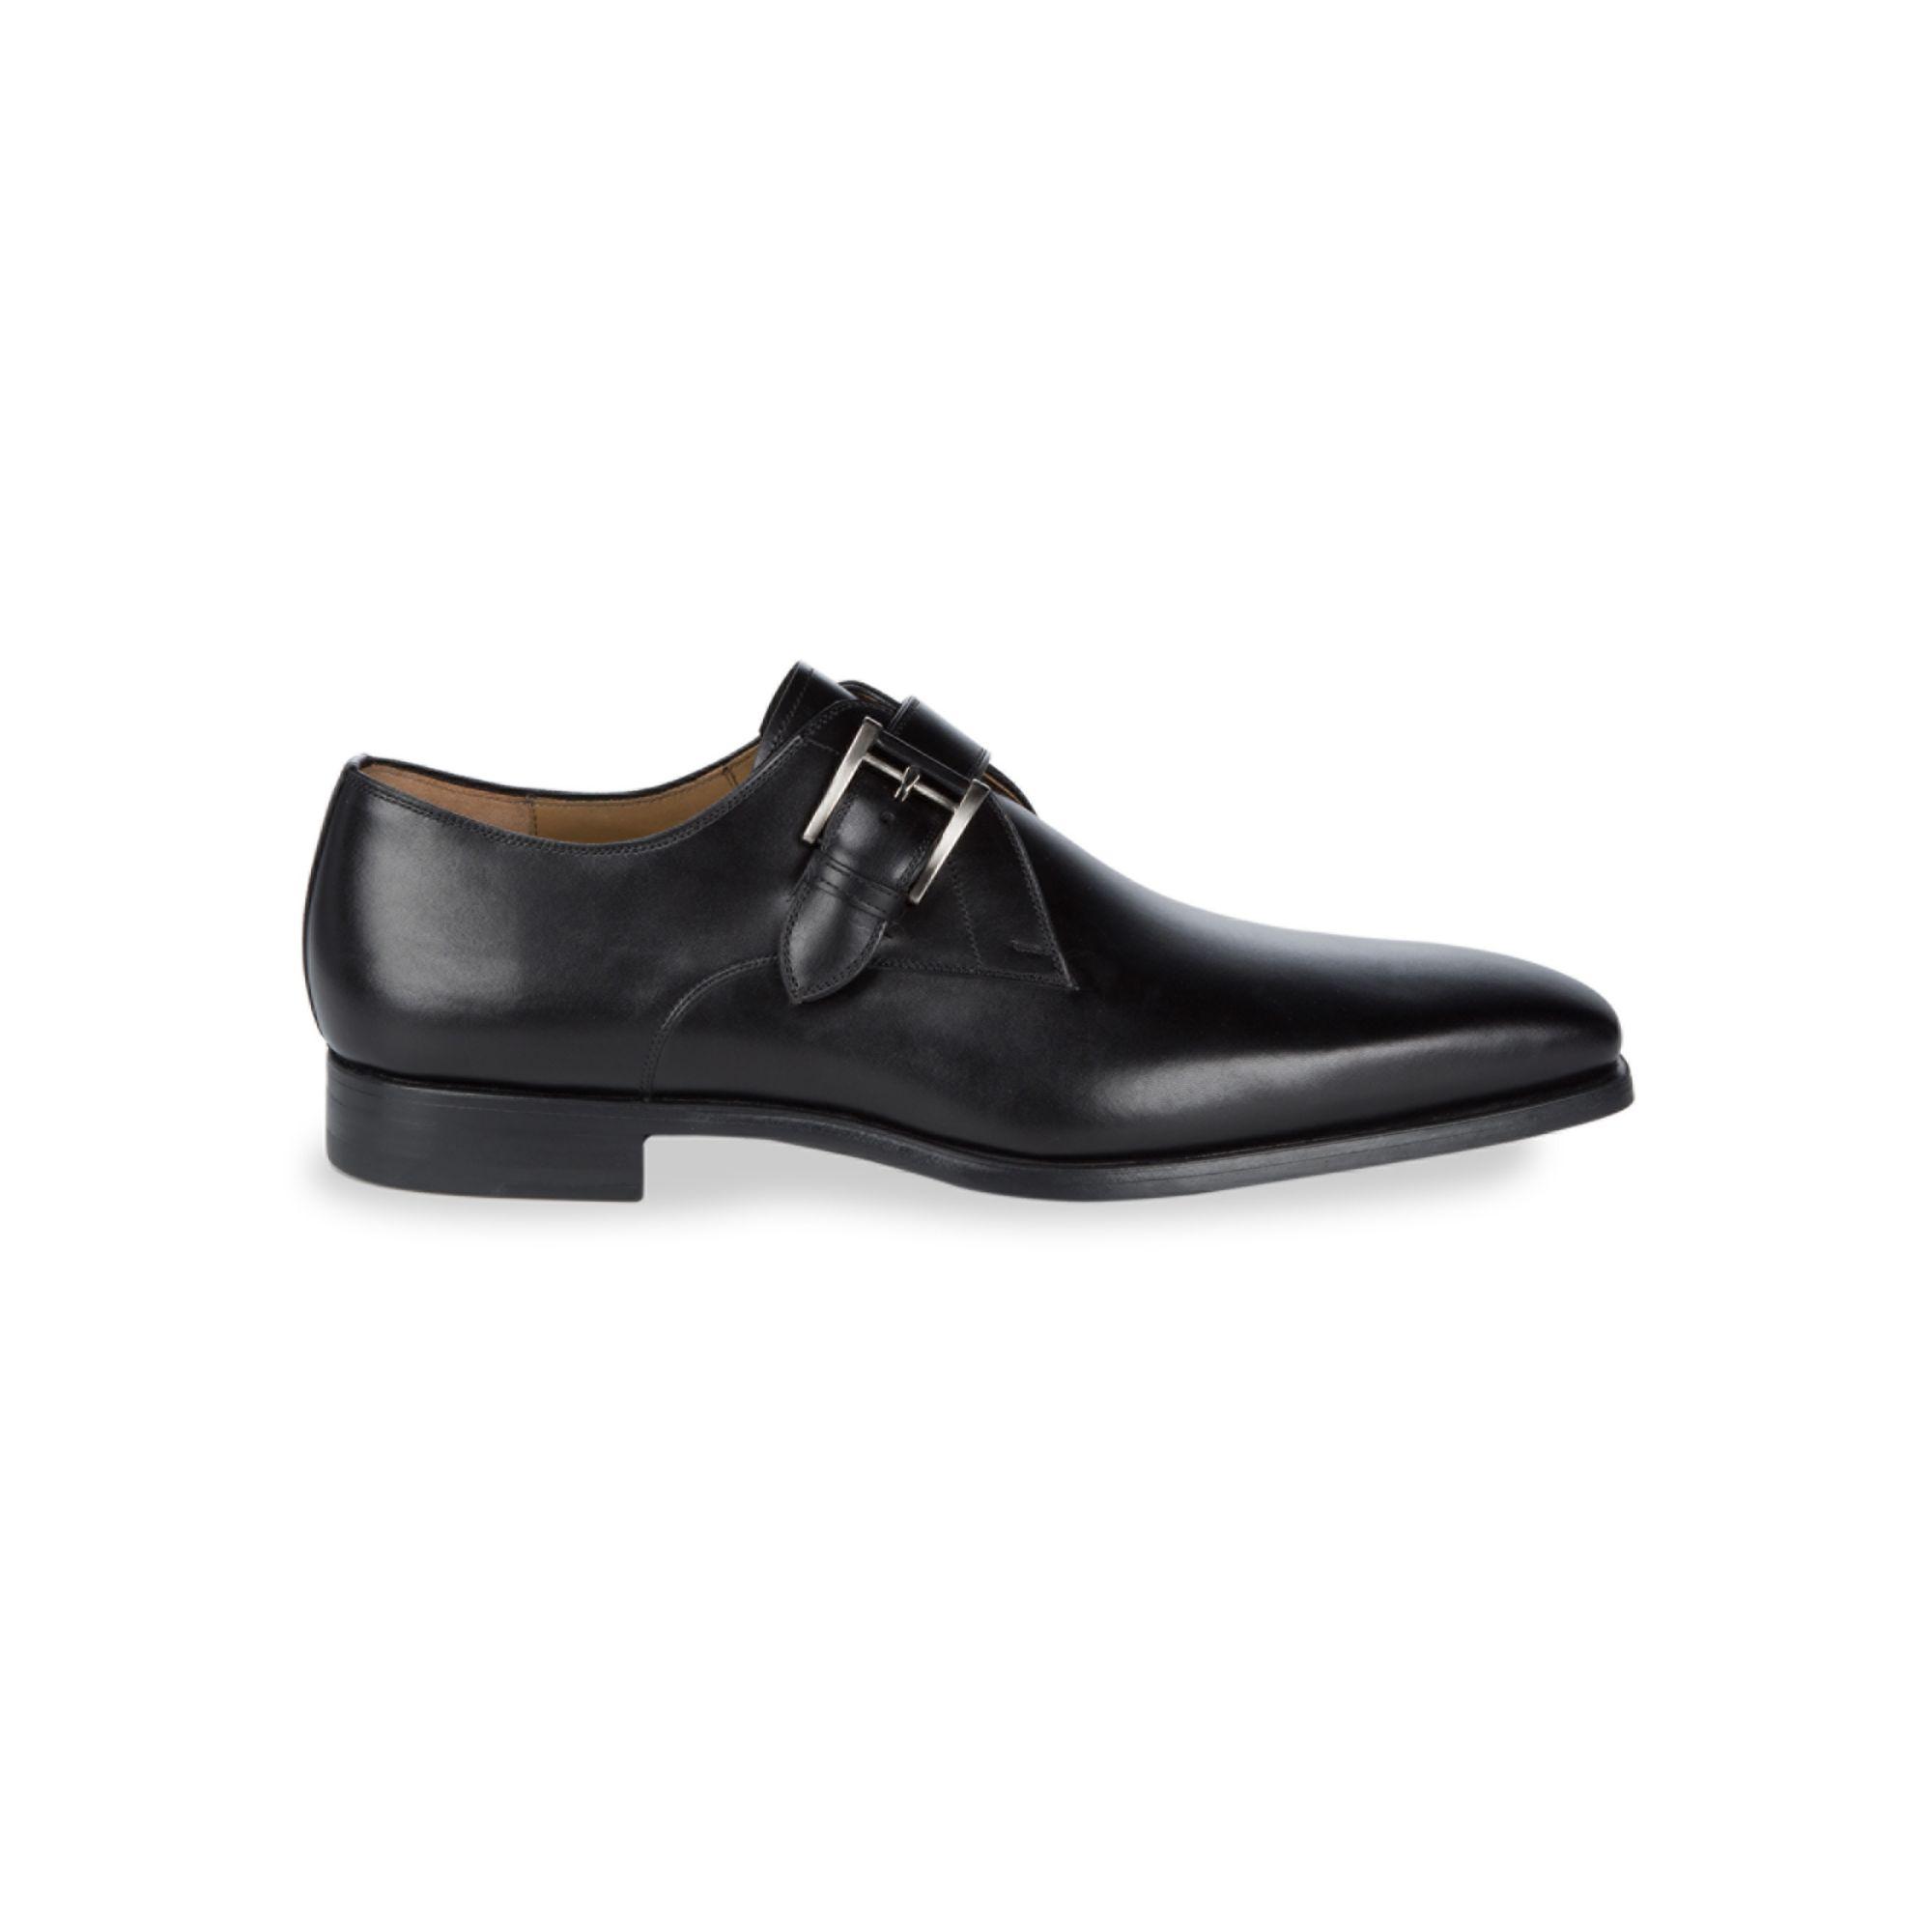 Magnanni Almond Toe Leather Monk Strap in Black for Men - Lyst